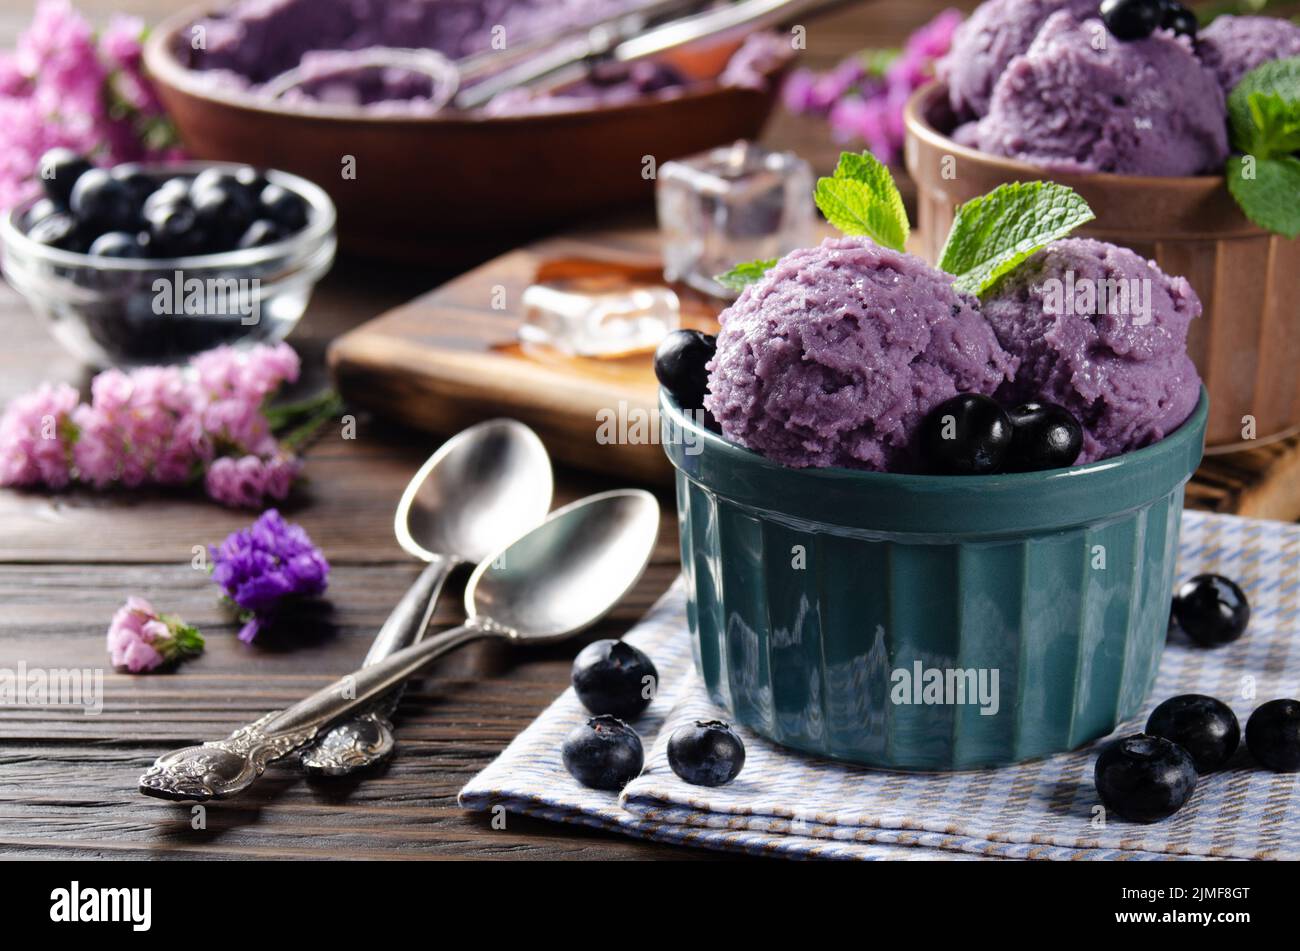 Blackberry icecream balls in clay bowls on wooden kitchen table with flowers and berries aside Stock Photo